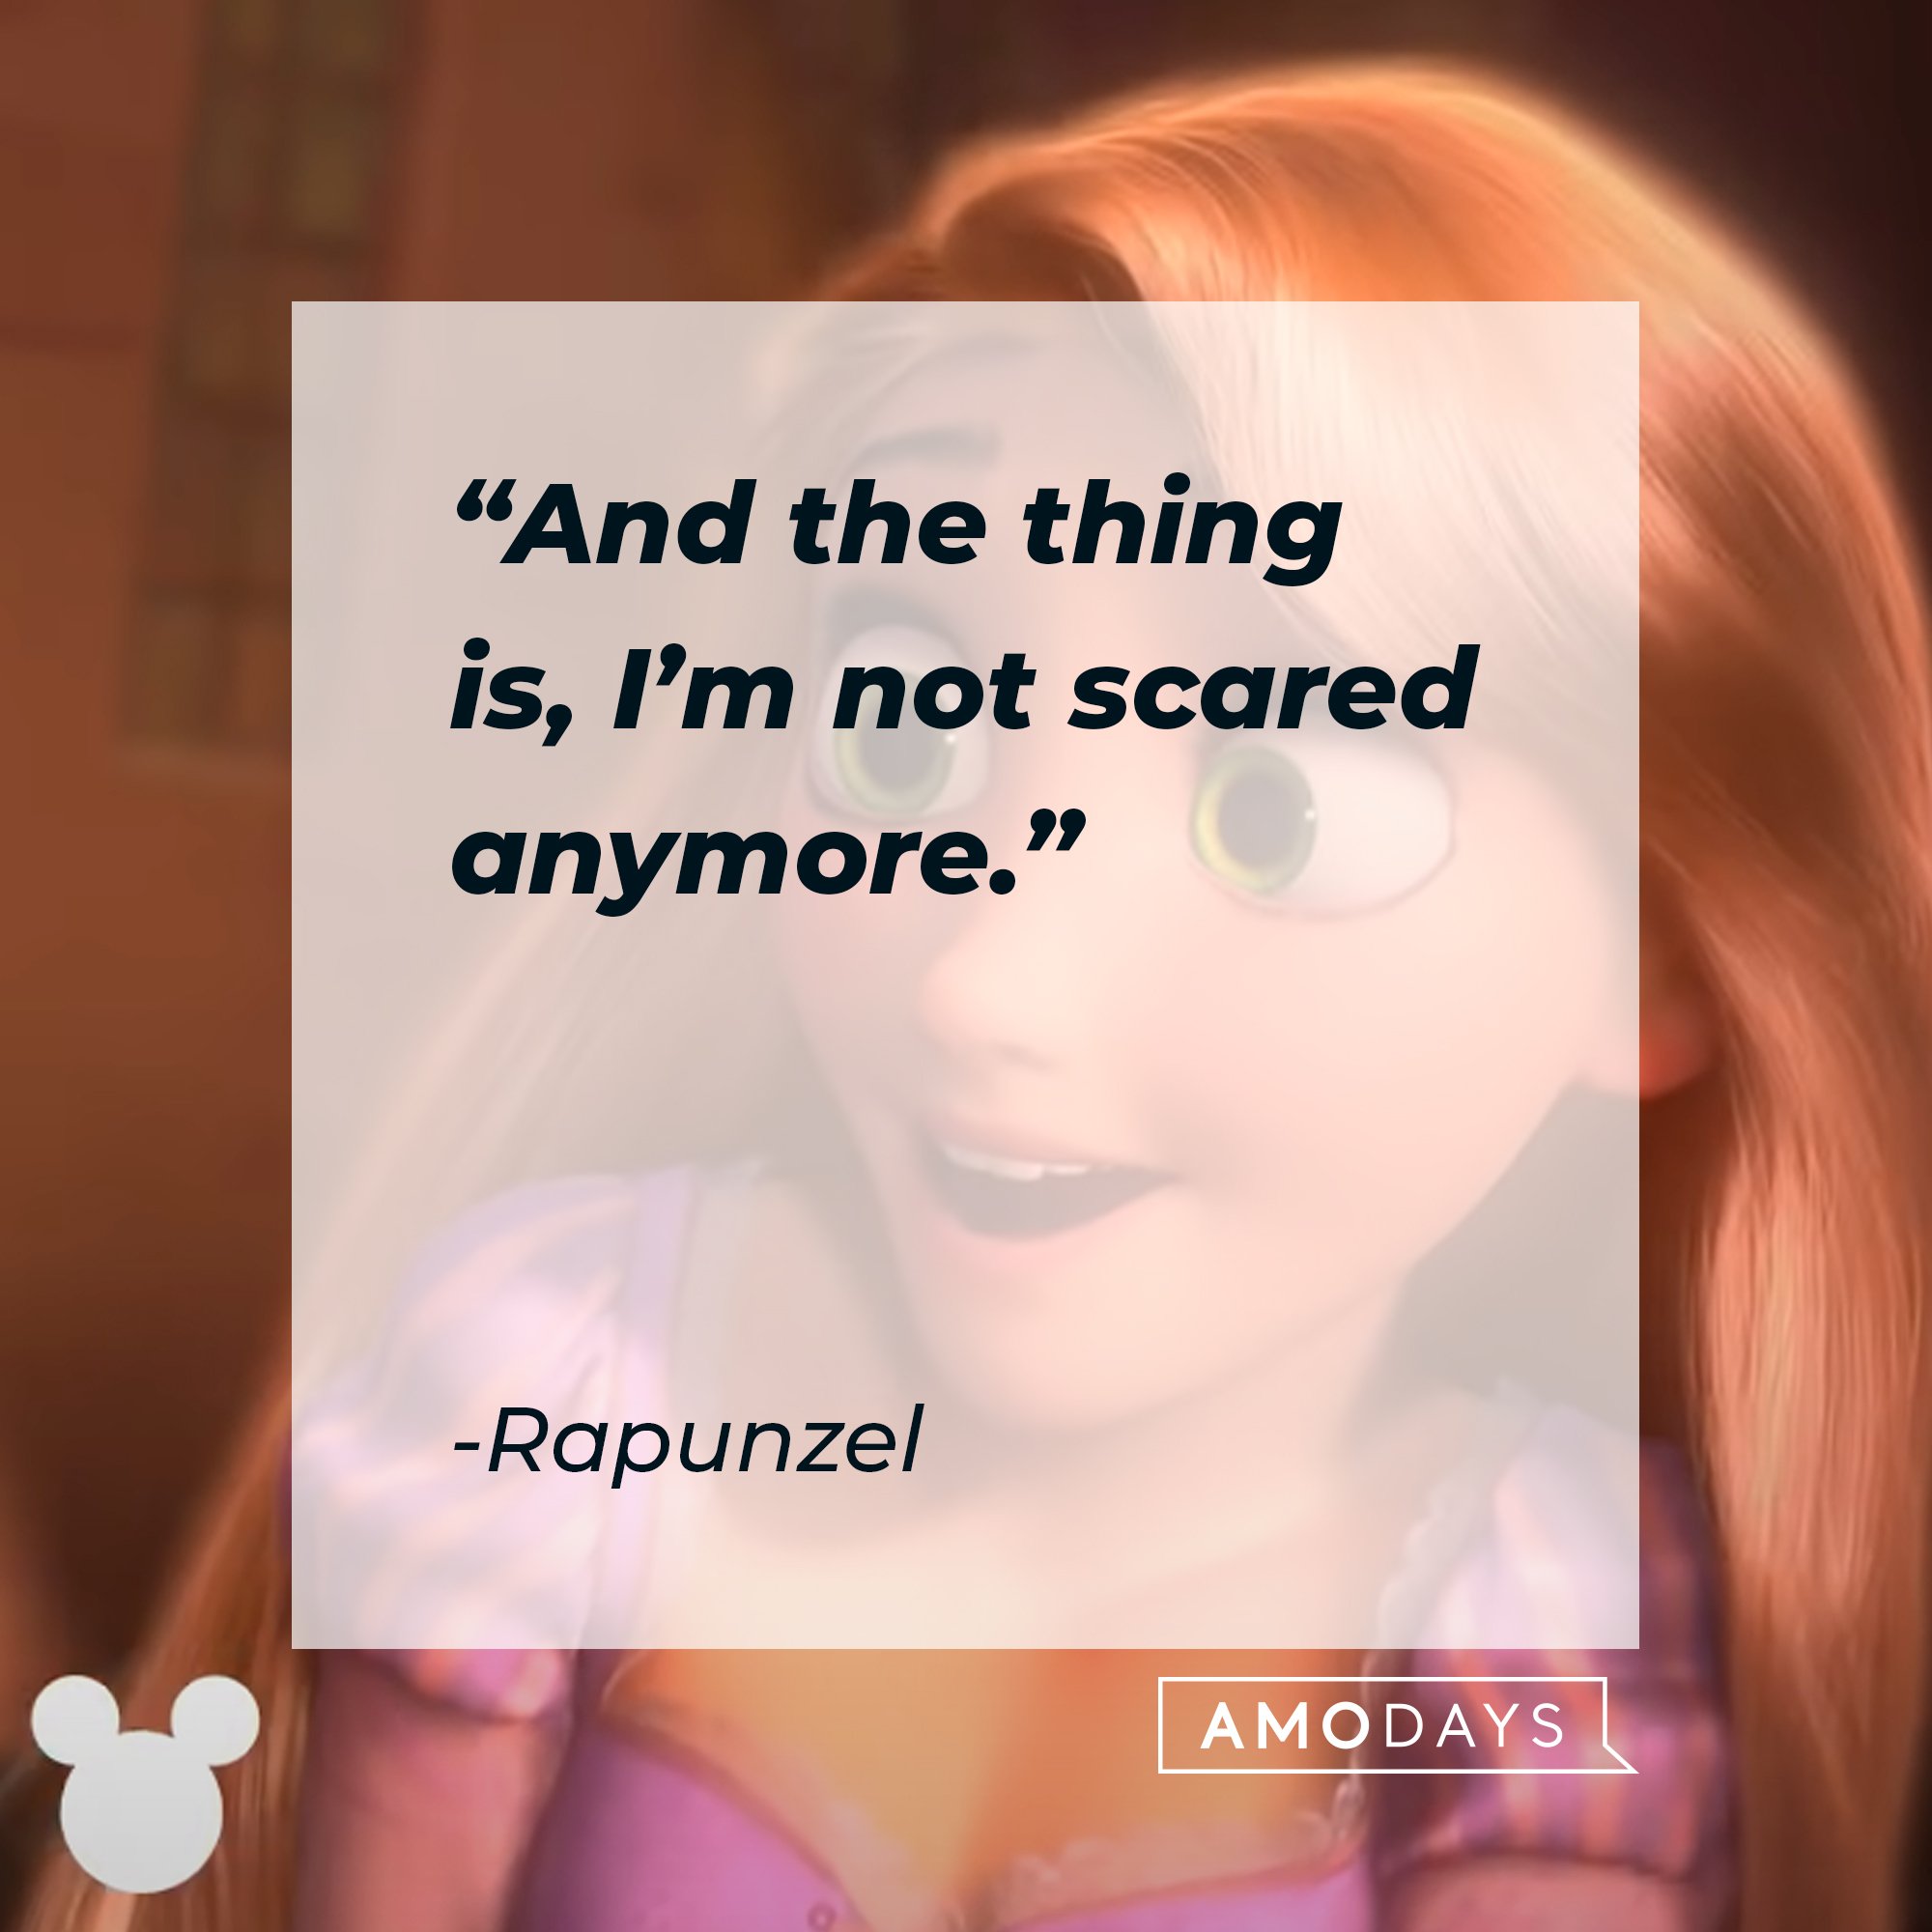 Rapunzel's quote: "And the thing is, I’m not scared anymore." | Image: AmoDays